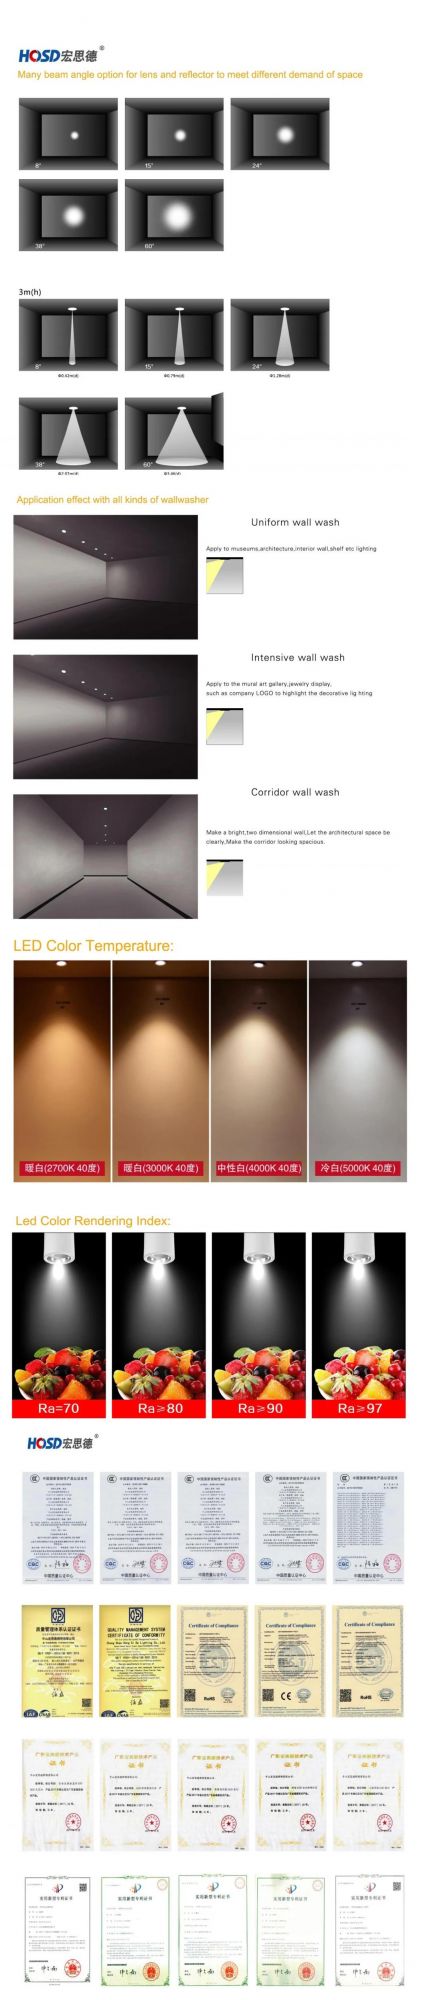 20-24W CE Ra>95 Bridgelux Osram COB Chip Spot LED Track Light for Shoes Clothes Chain Stores shopping Mall Gym